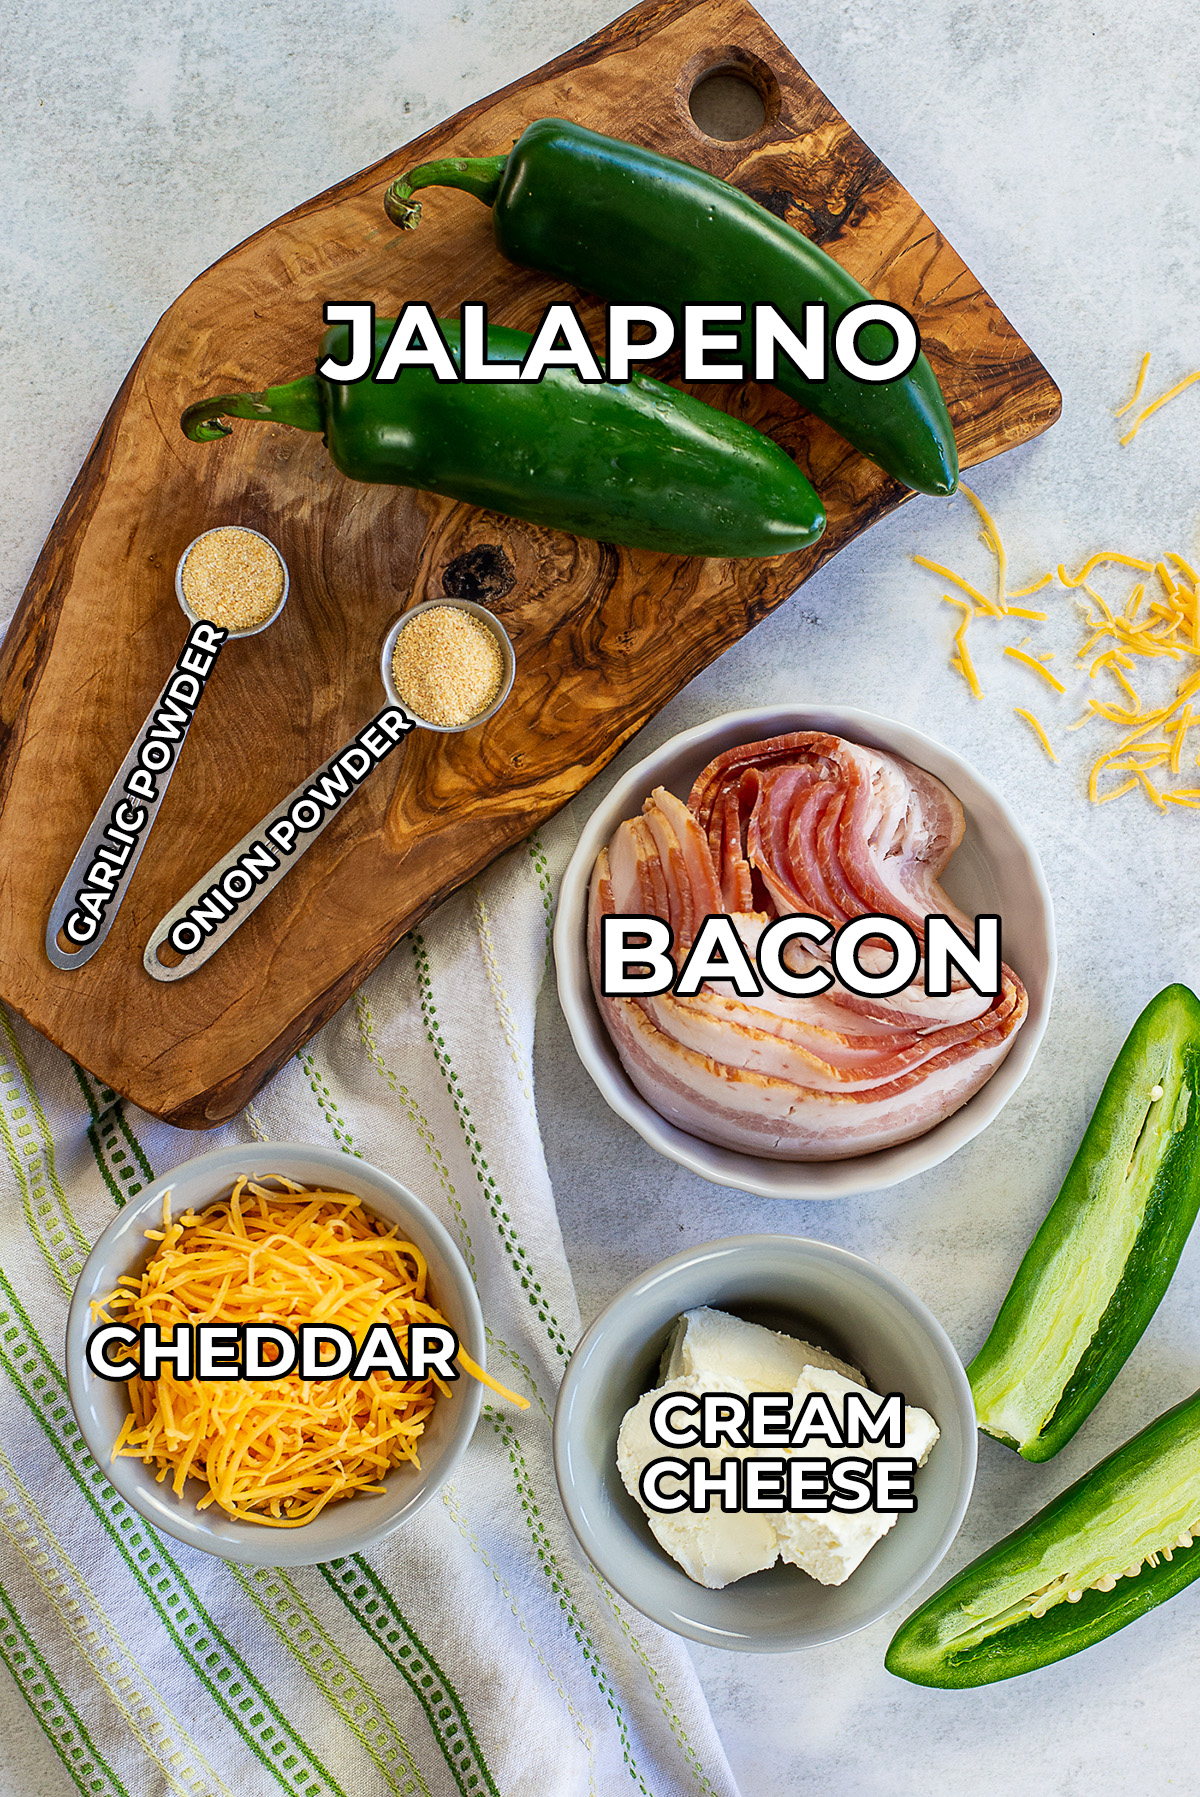 Ingredients for jalapeno poppers spread on a counter.